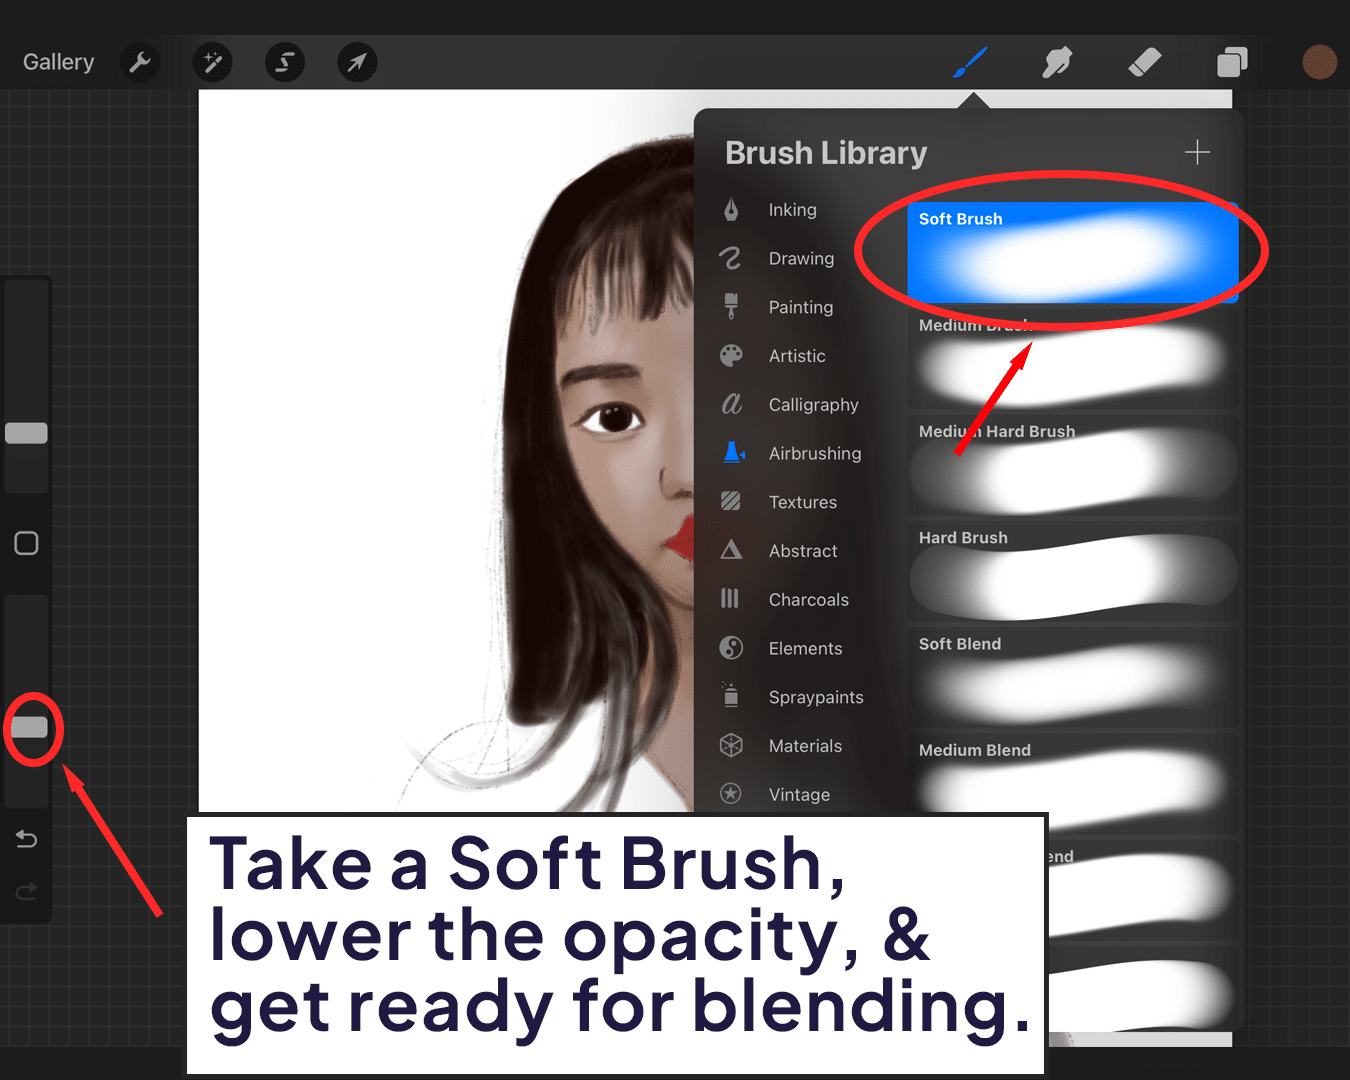 Use Soft Brush and blend